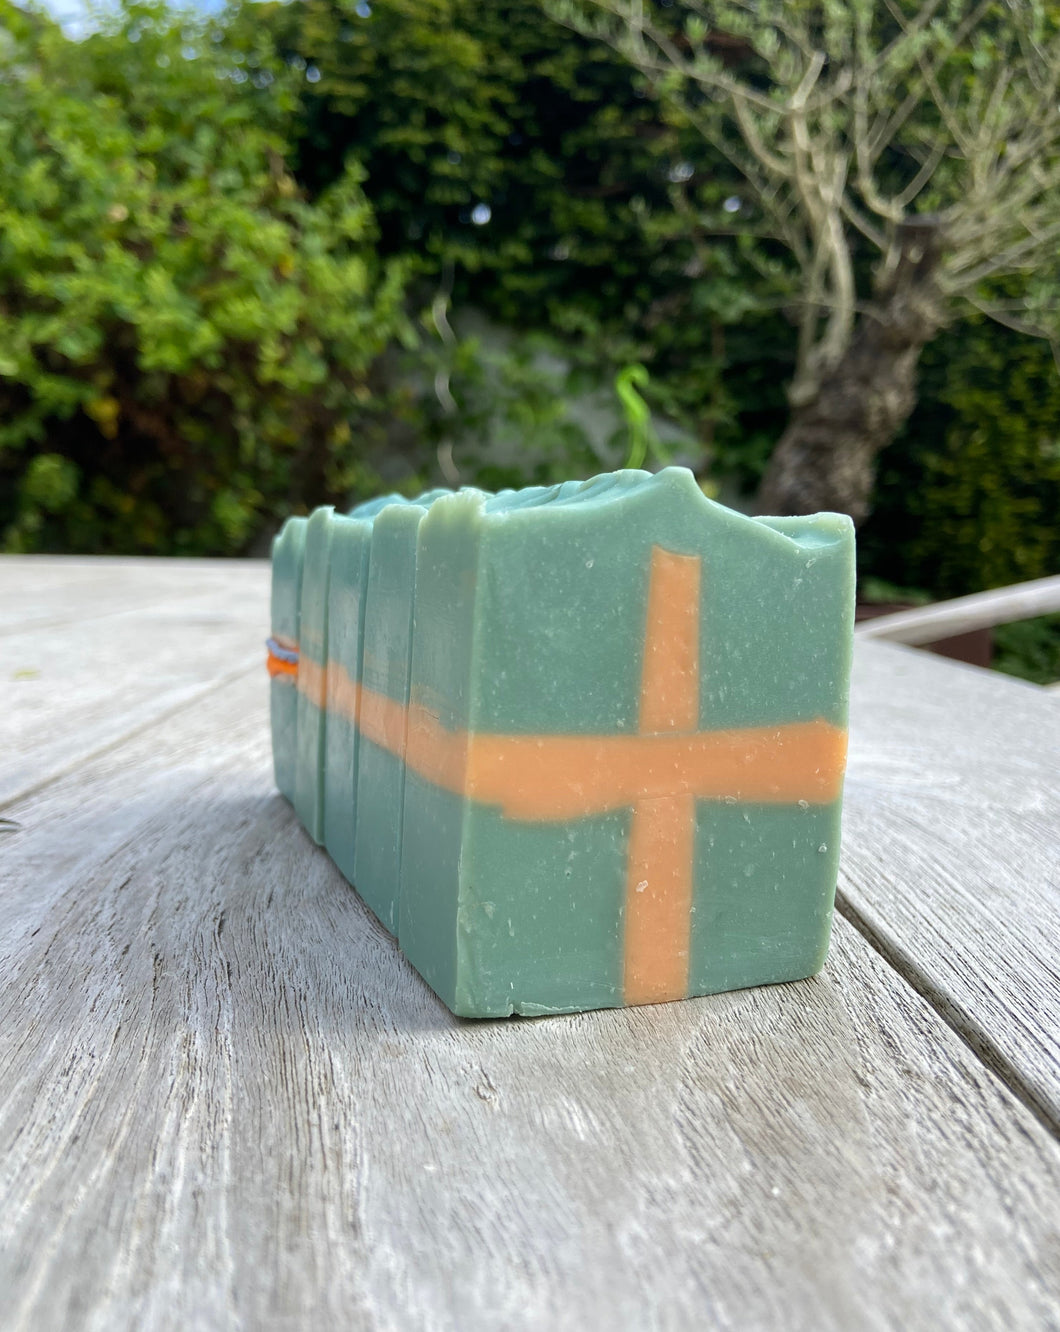 Natural skin care product. Handmade soap produced based on own recipe in our own soap studio in Nijmegen. Natural and only high quality ingredients, moisturizing, gentle to the skin, stustainable, vegan and palm oil free. for every day use, Hand and body soap.